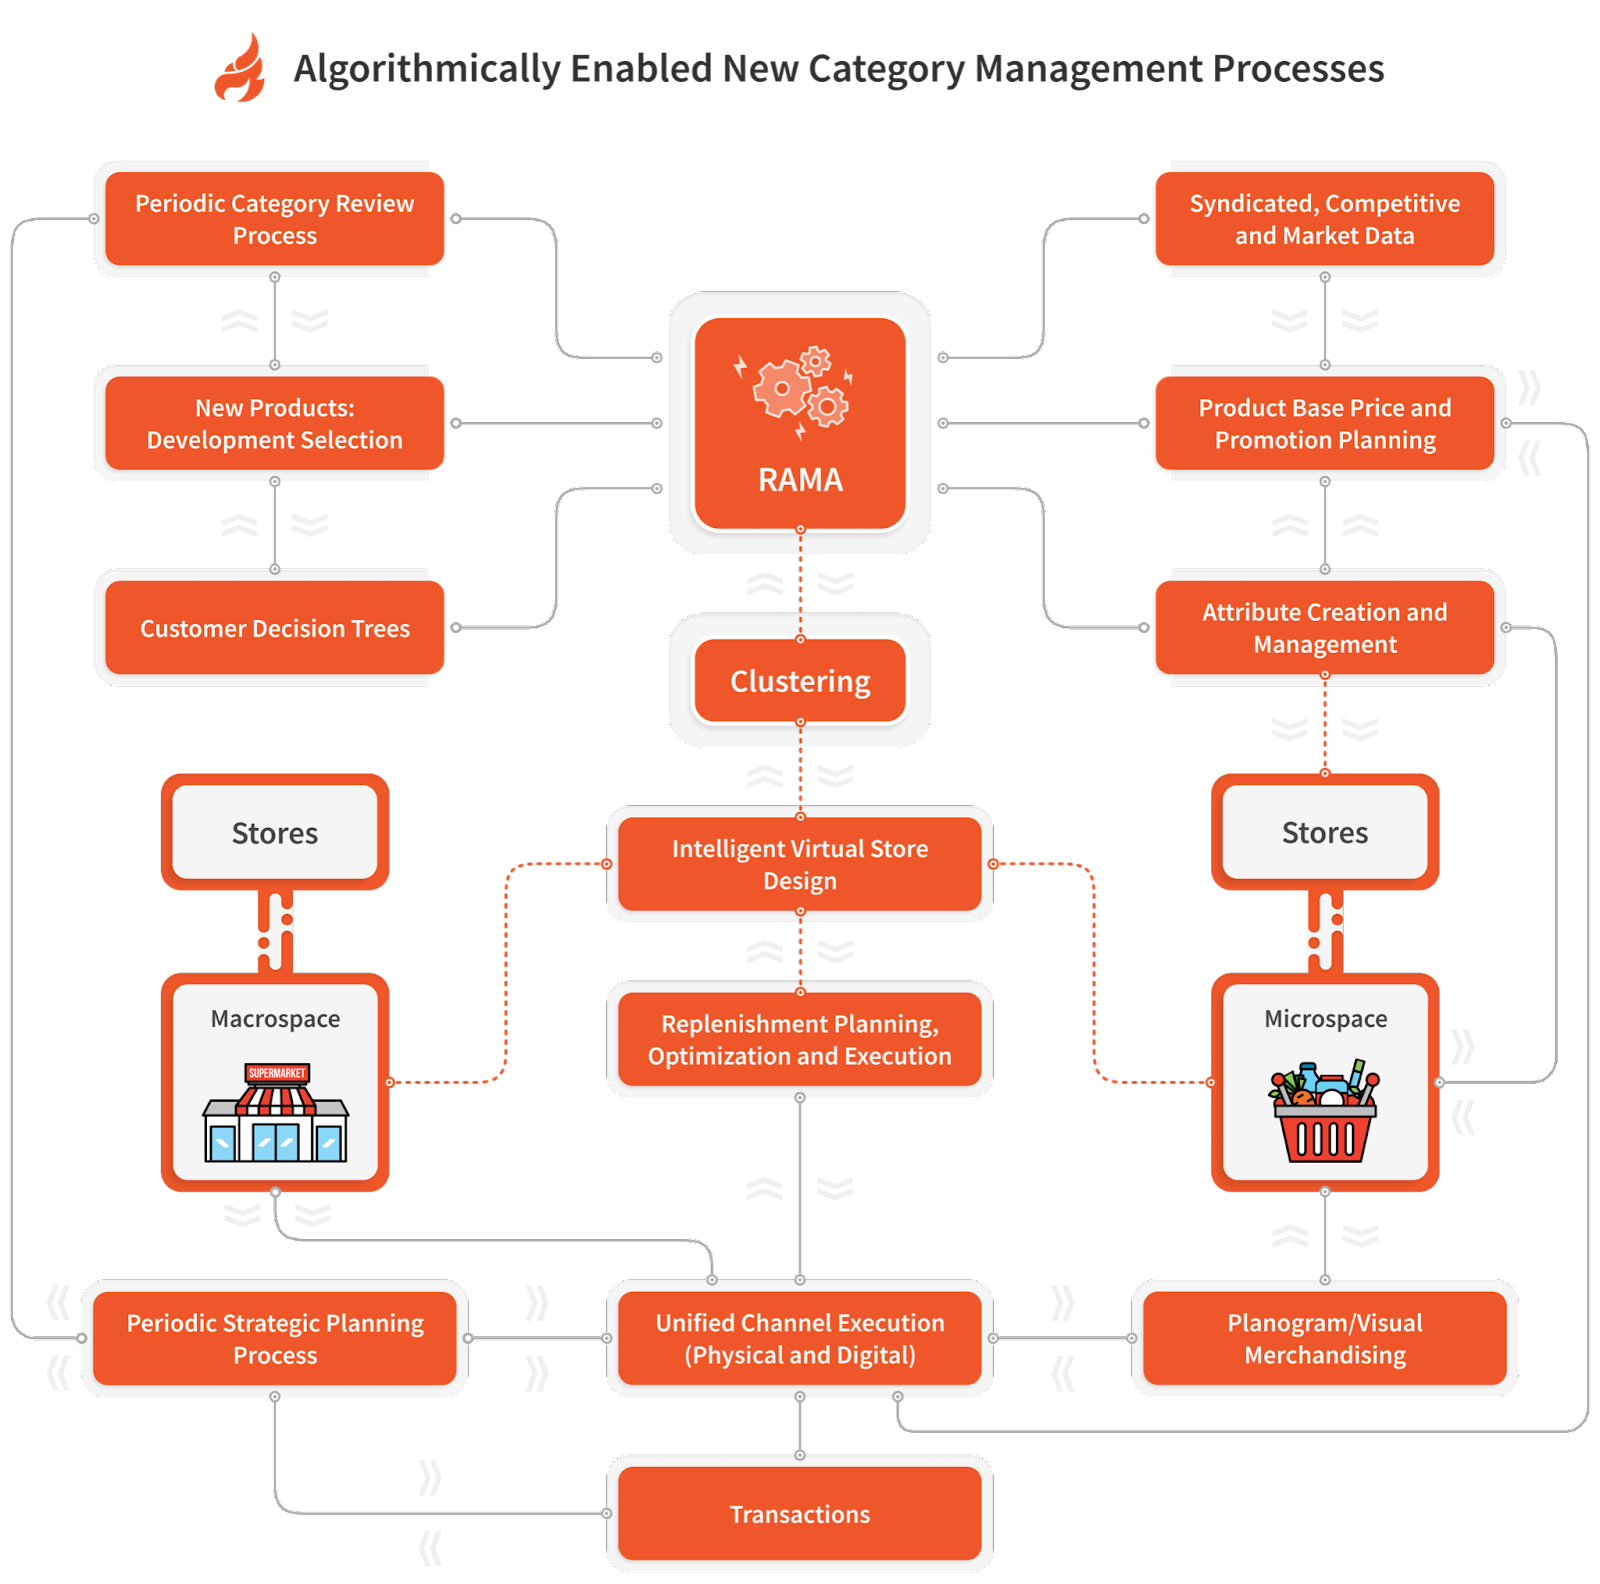 Algorithmically Enabled New Category Management Processes